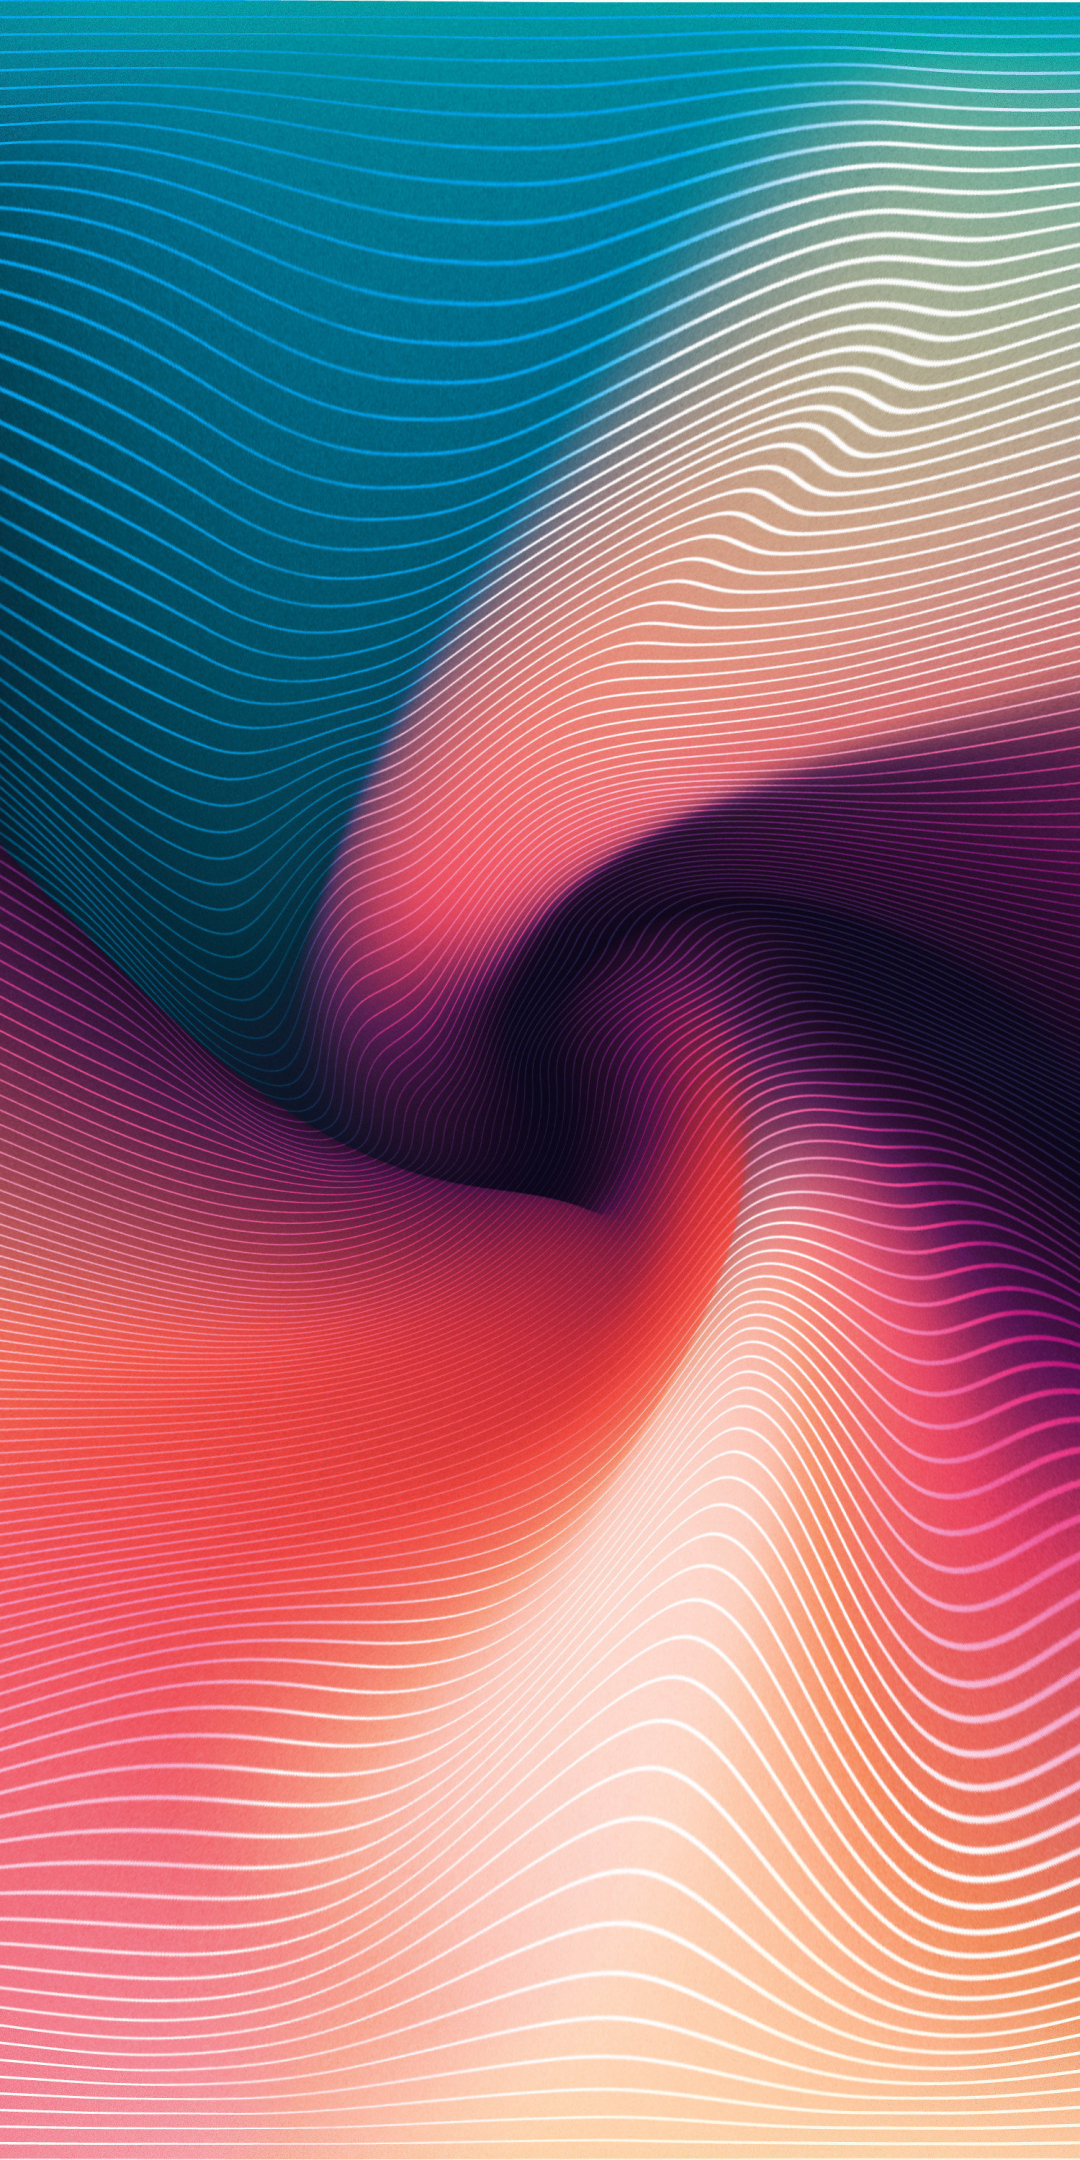 Spiral grid, warp, abstract, colorful, 1080x2160 wallpaper